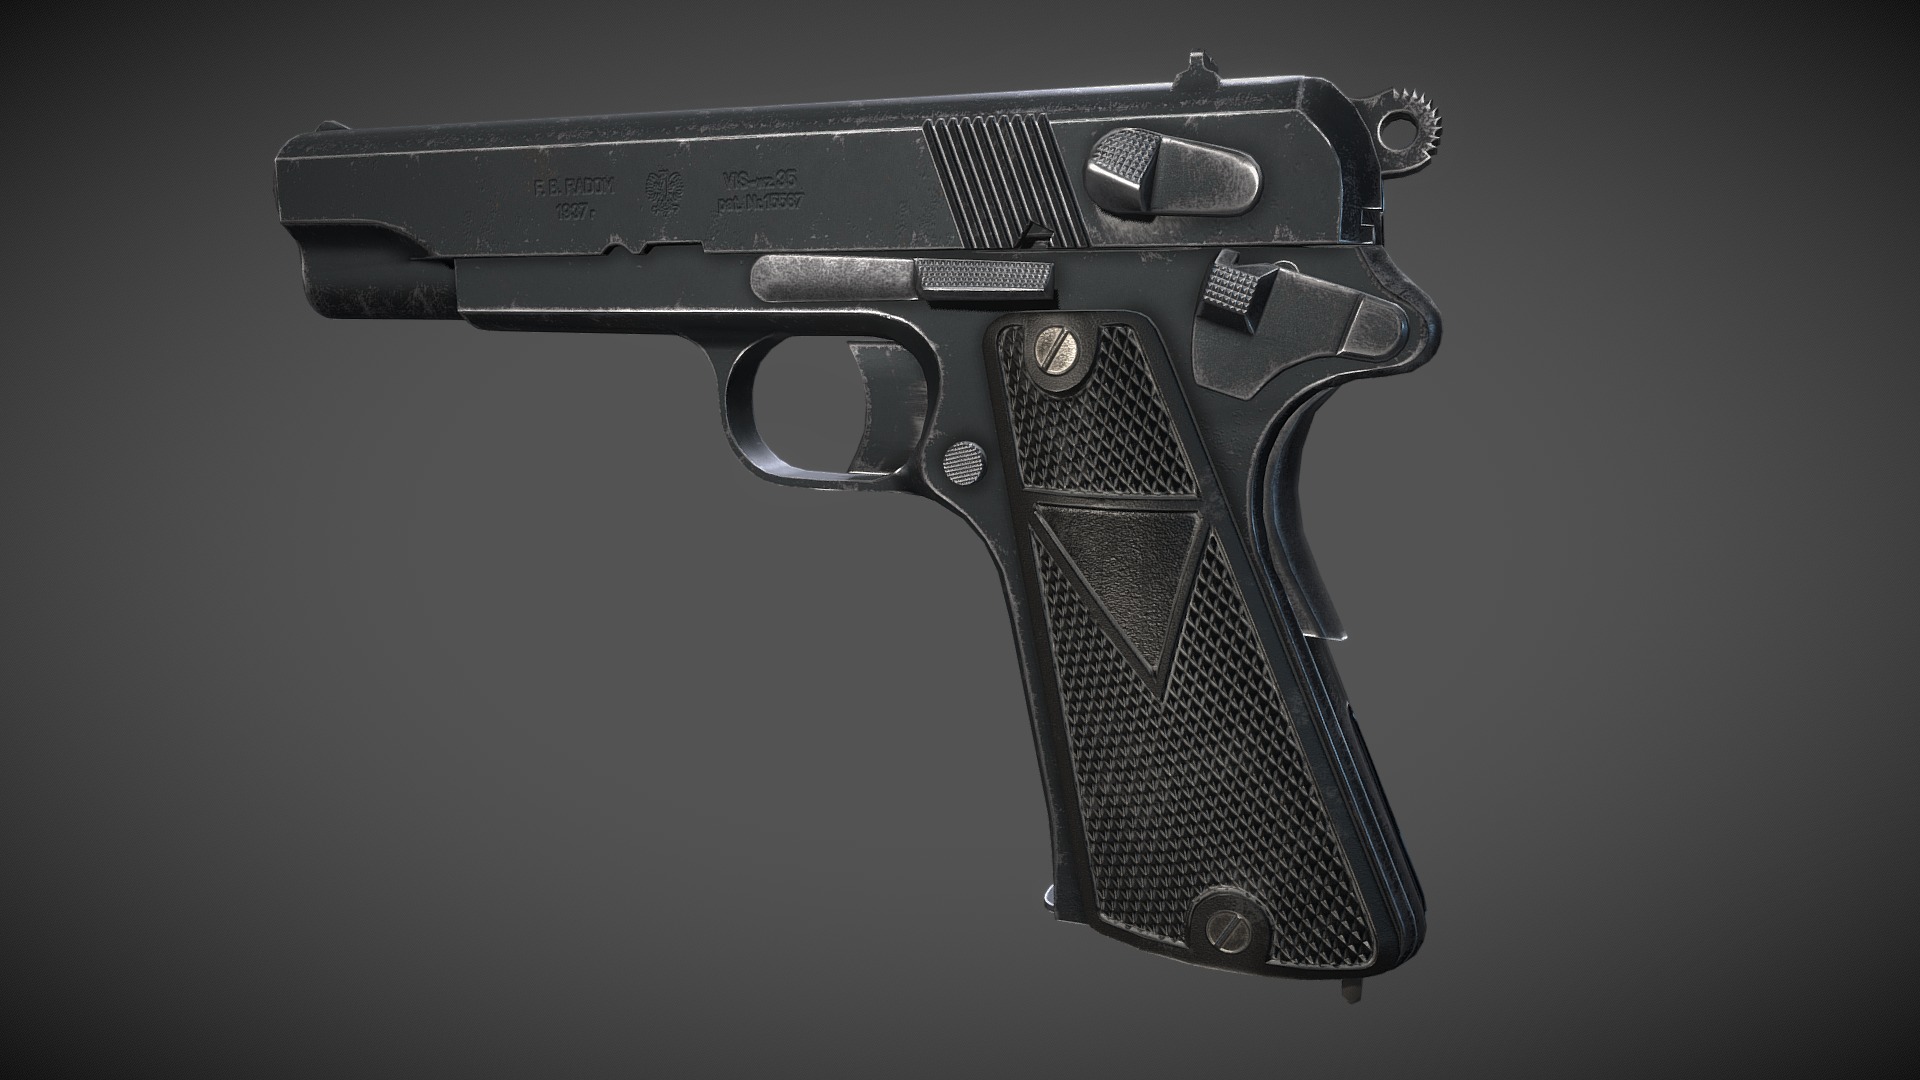 3D model vis wz.35 - This is a 3D model of the vis wz.35. The 3D model is about a black handgun with a black handle.